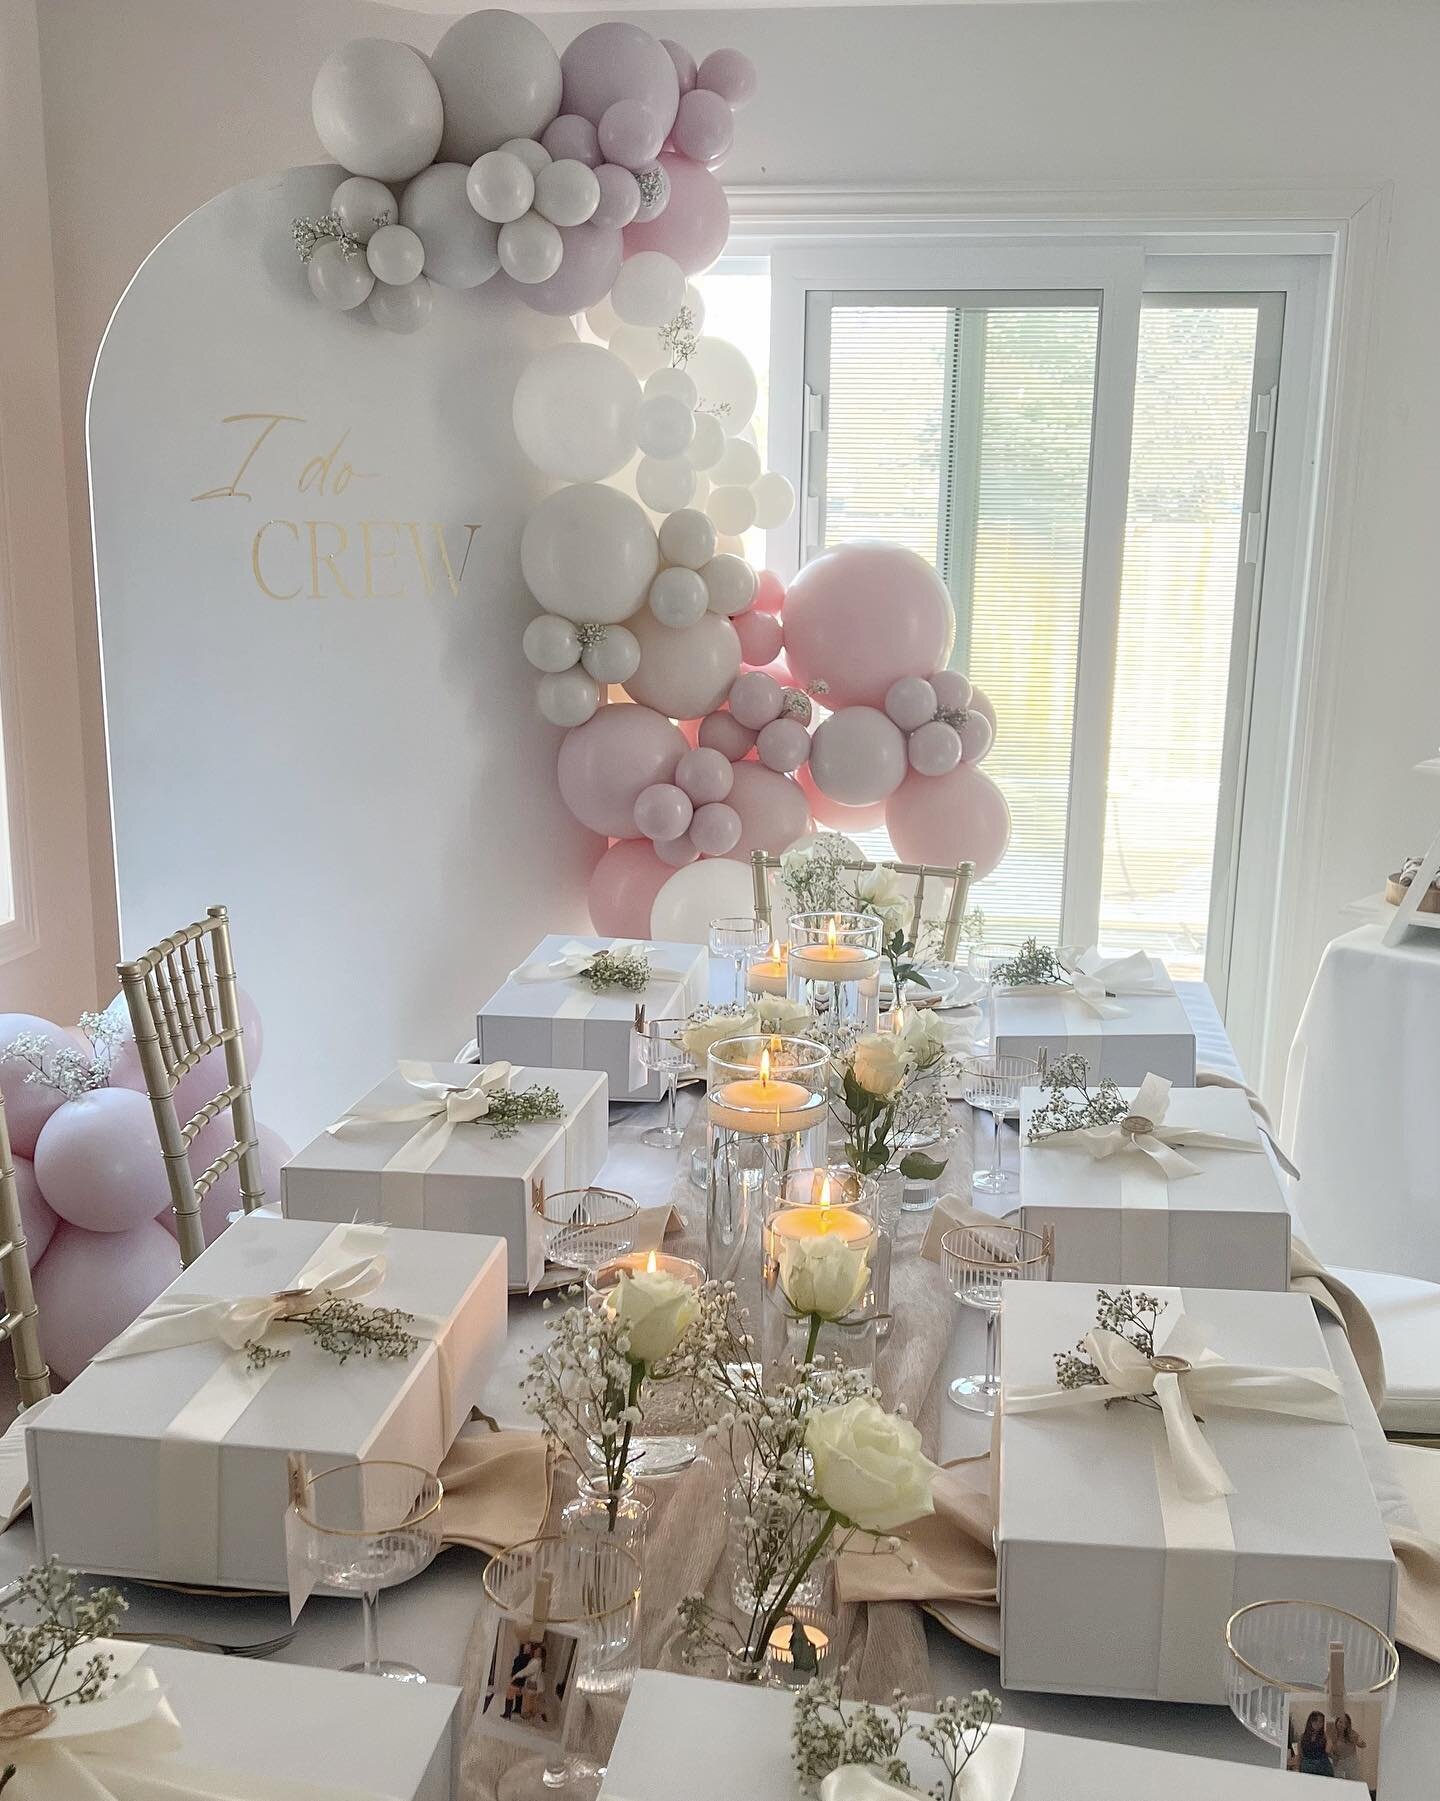 The sweetest bridesmaid proposal setup for @alessyabaggettadesigns! 💕✨

Decor: @somethingvintage.rentals 
Balloons &amp; Backdrop: @poppedbygg 

To view our full rental collection, visit our website!
www.somethingvintage.ca

#decorrentals #eventrent